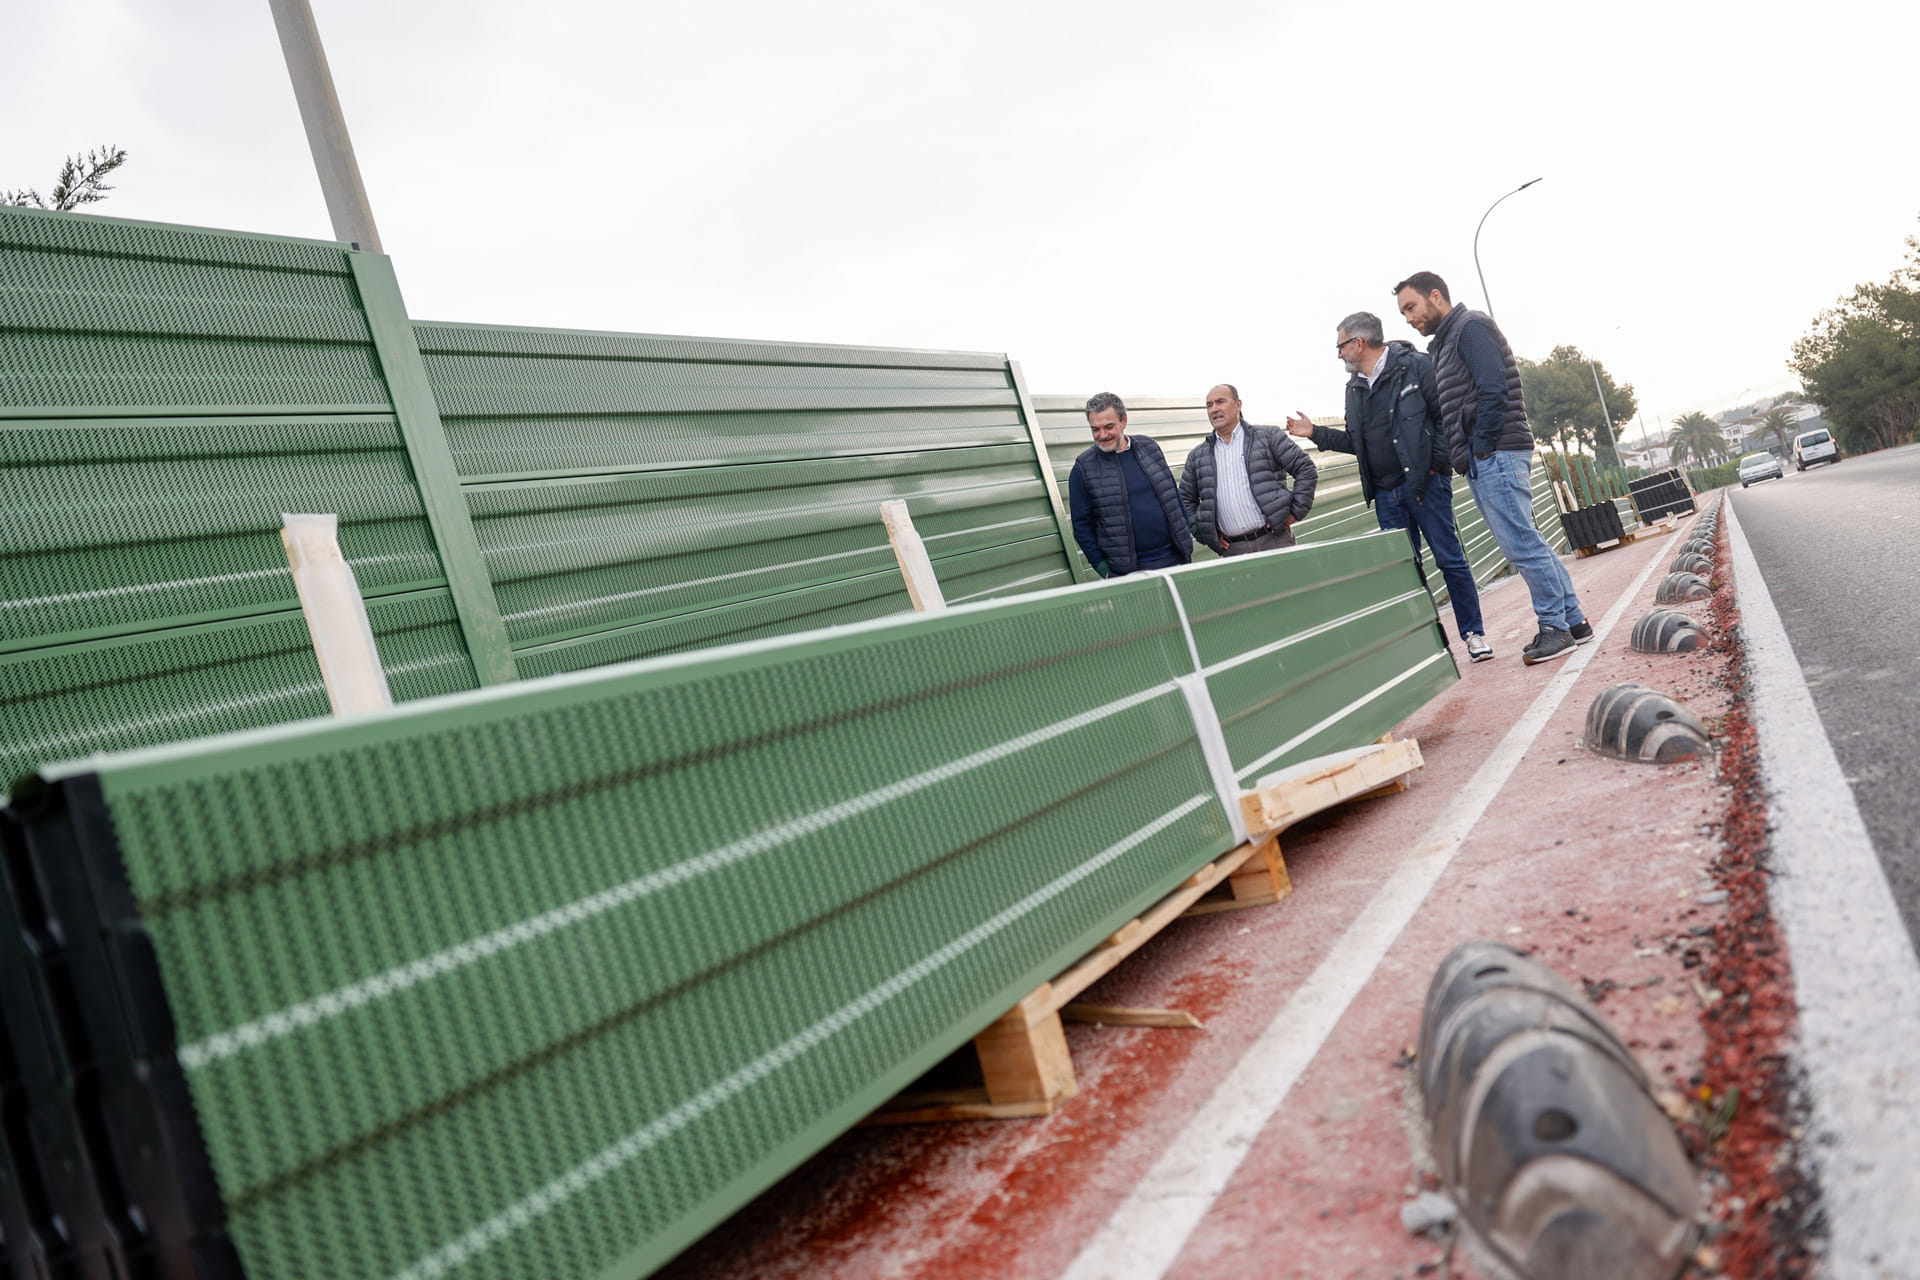 Acoustic Barriers Erected To Cut Noise Pollution On Costa Blanca Urbanisation In Spain